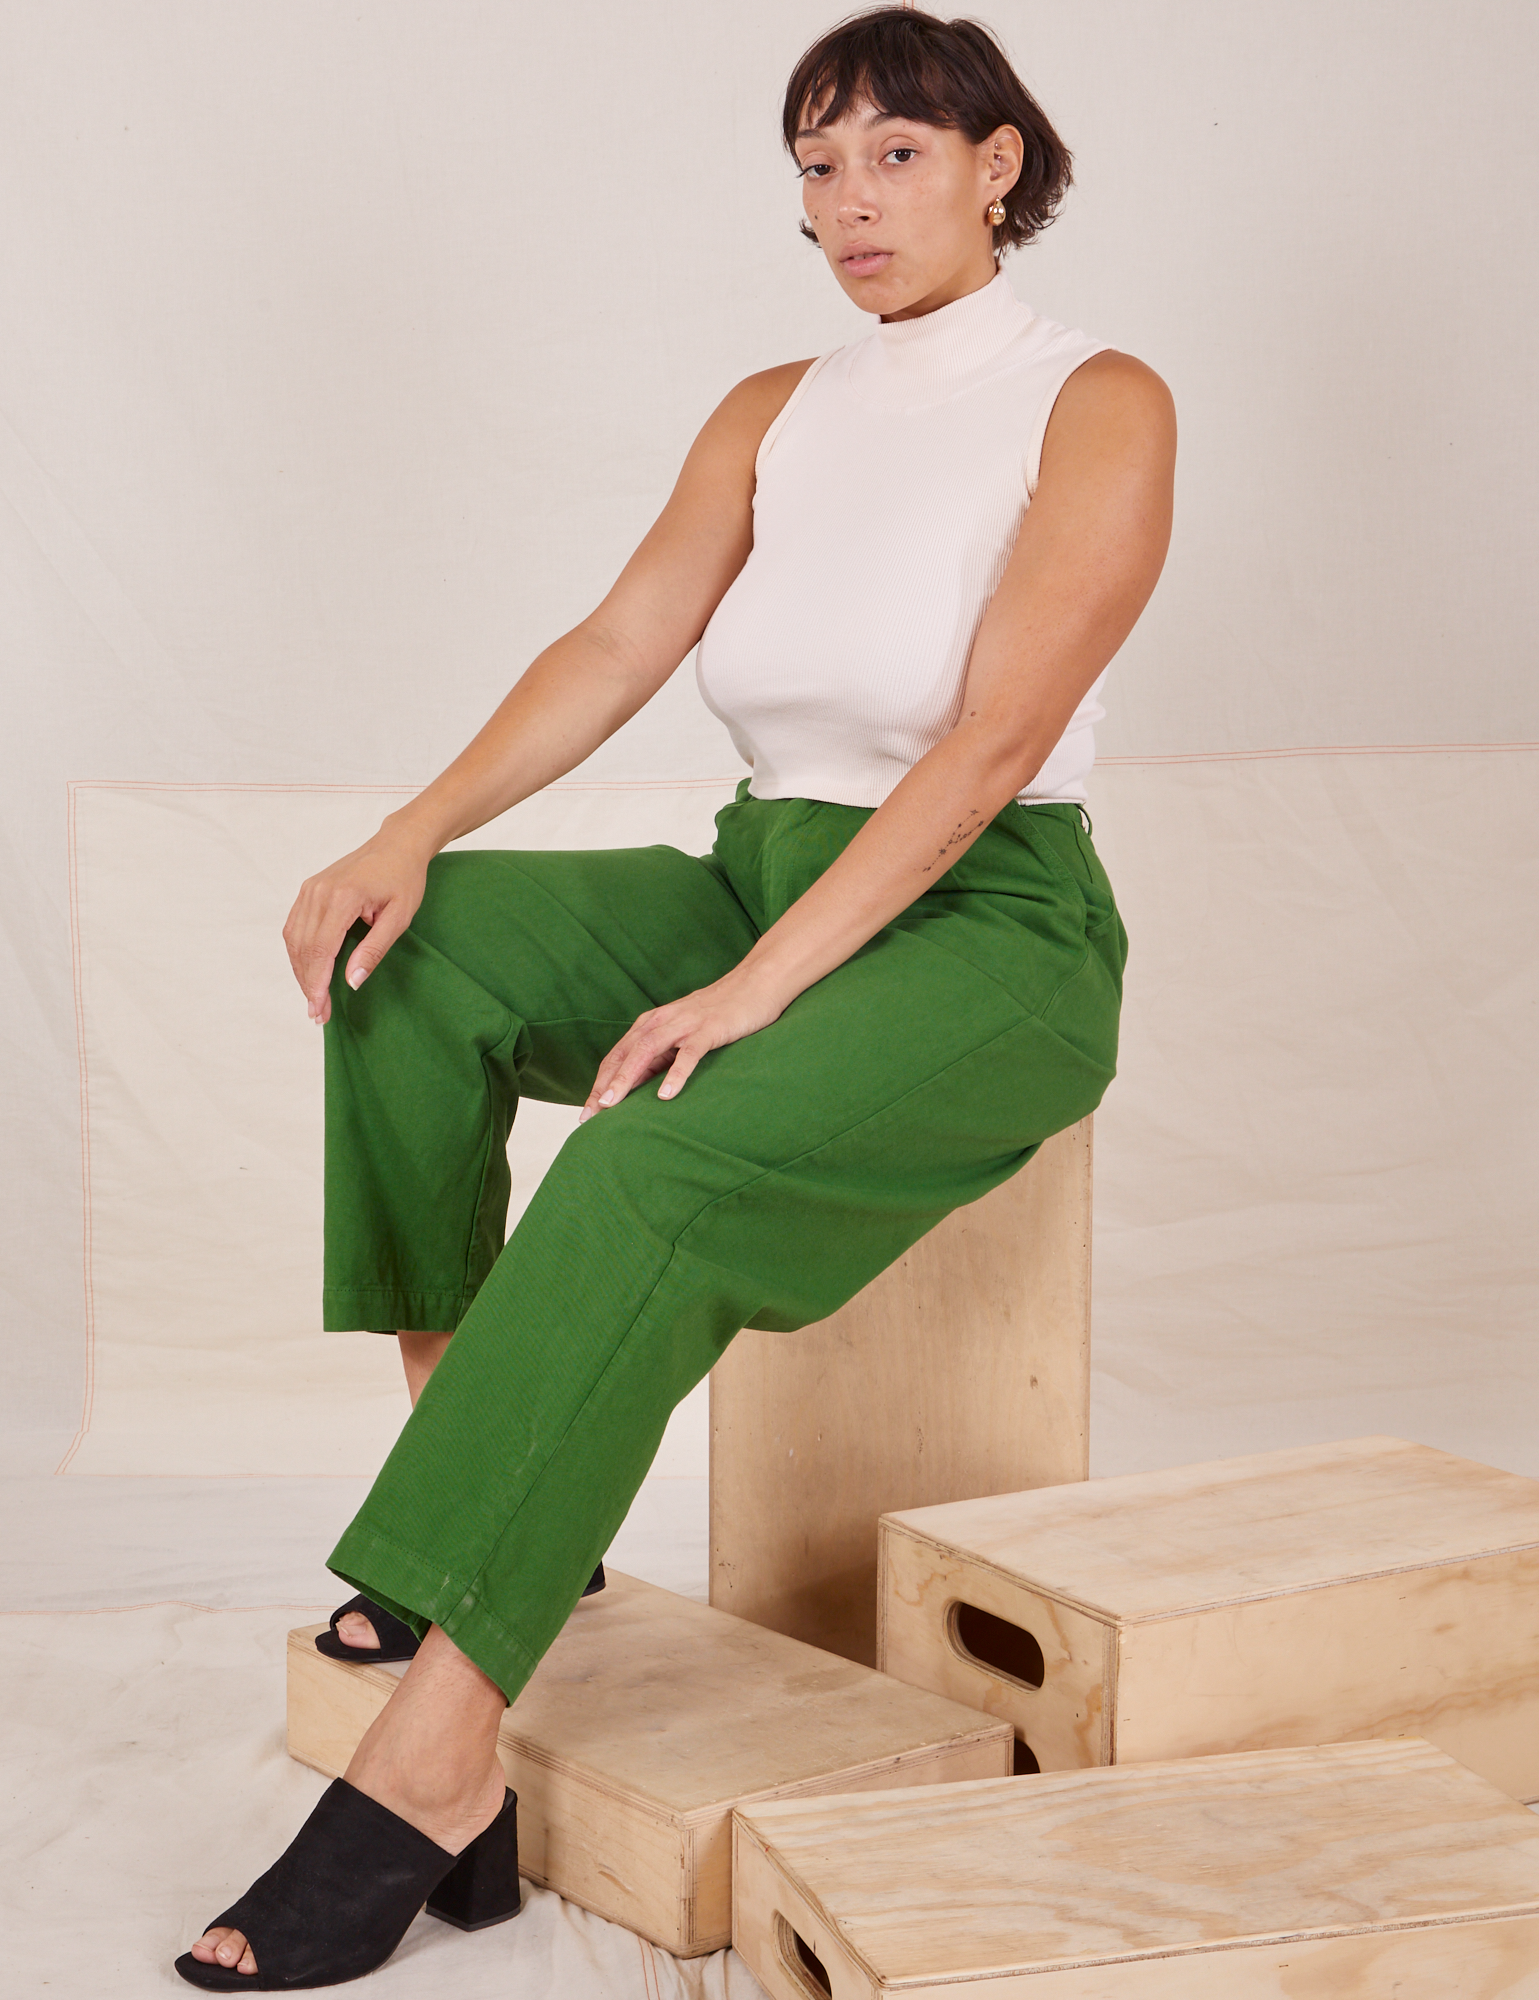 Tiara is sitting on a wooden crate. She is wearing Heavyweight Trousers in Lawn Green and Sleeveless Turtleneck in vintage tee off-white